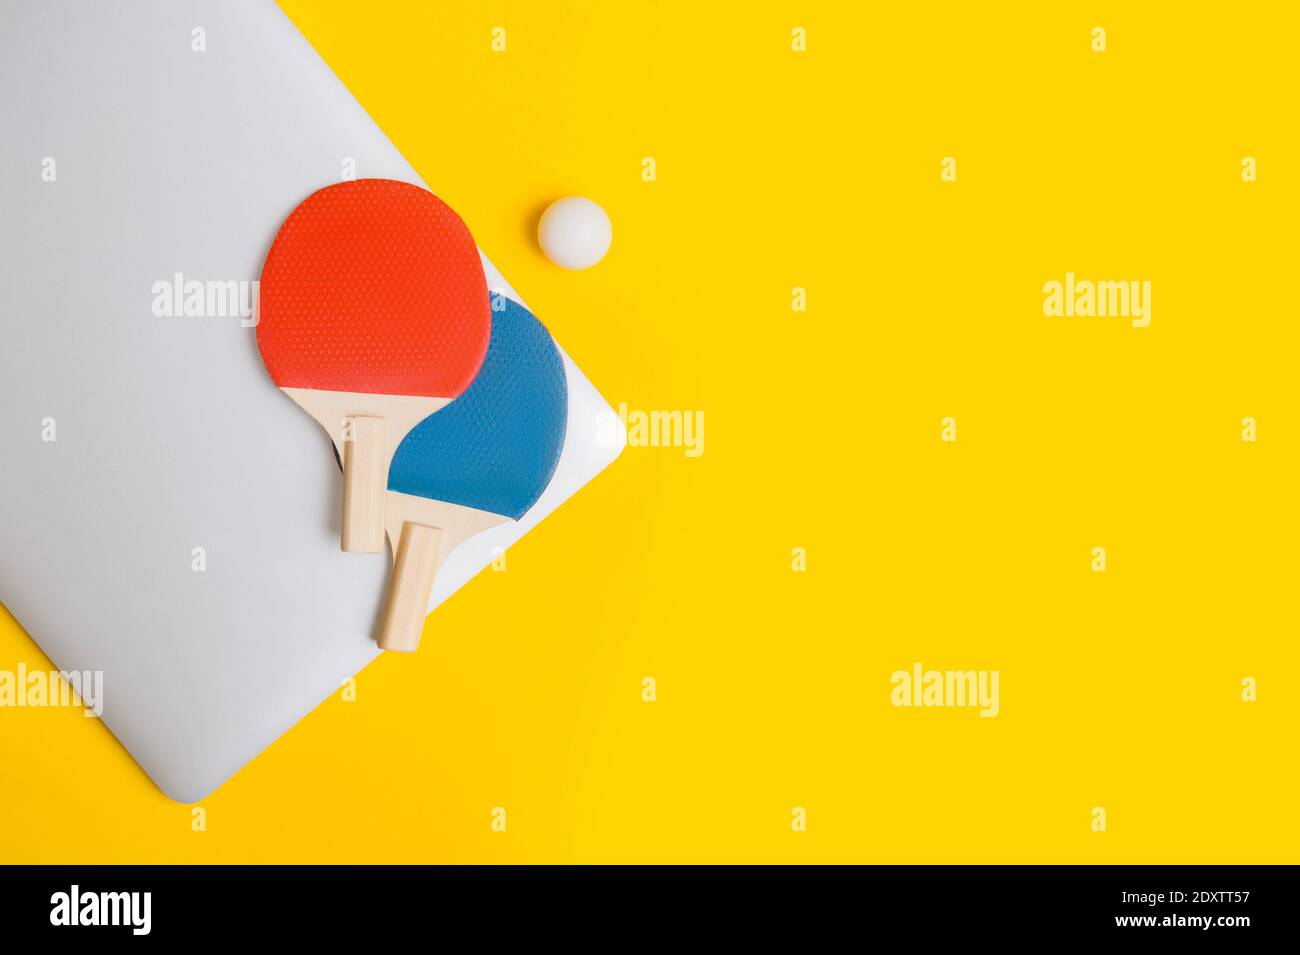 Table tennis racket, ball and grey laptop on yellow background. Online workout concept. Top view, space for your text Stock Photo